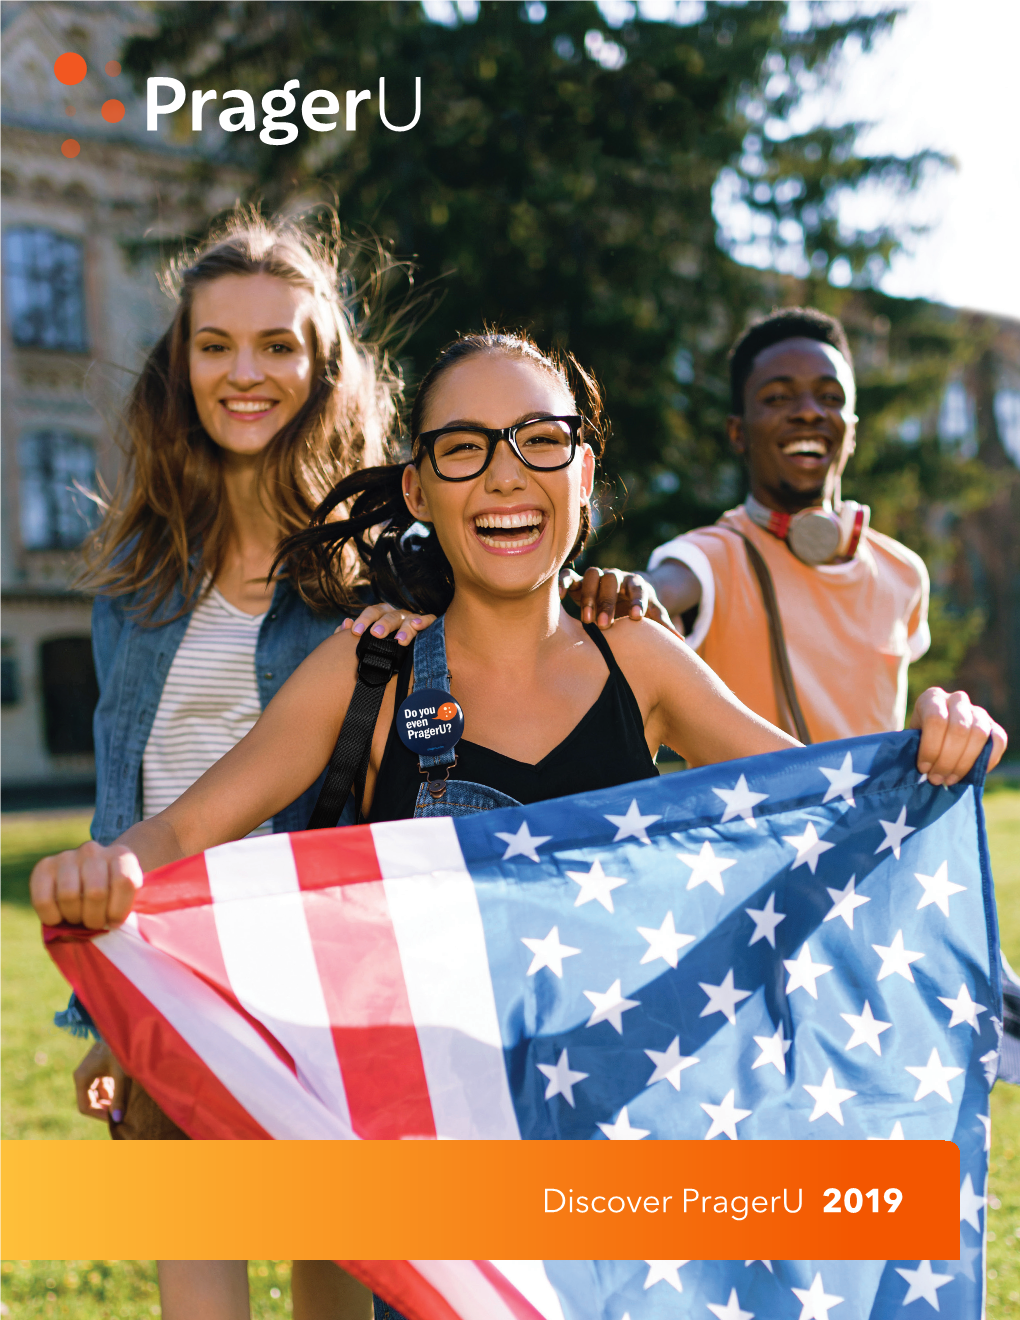 Discover Prageru 2019 OUR VISION: a World Committed to Life, Liberty, and the Pursuit of Happiness